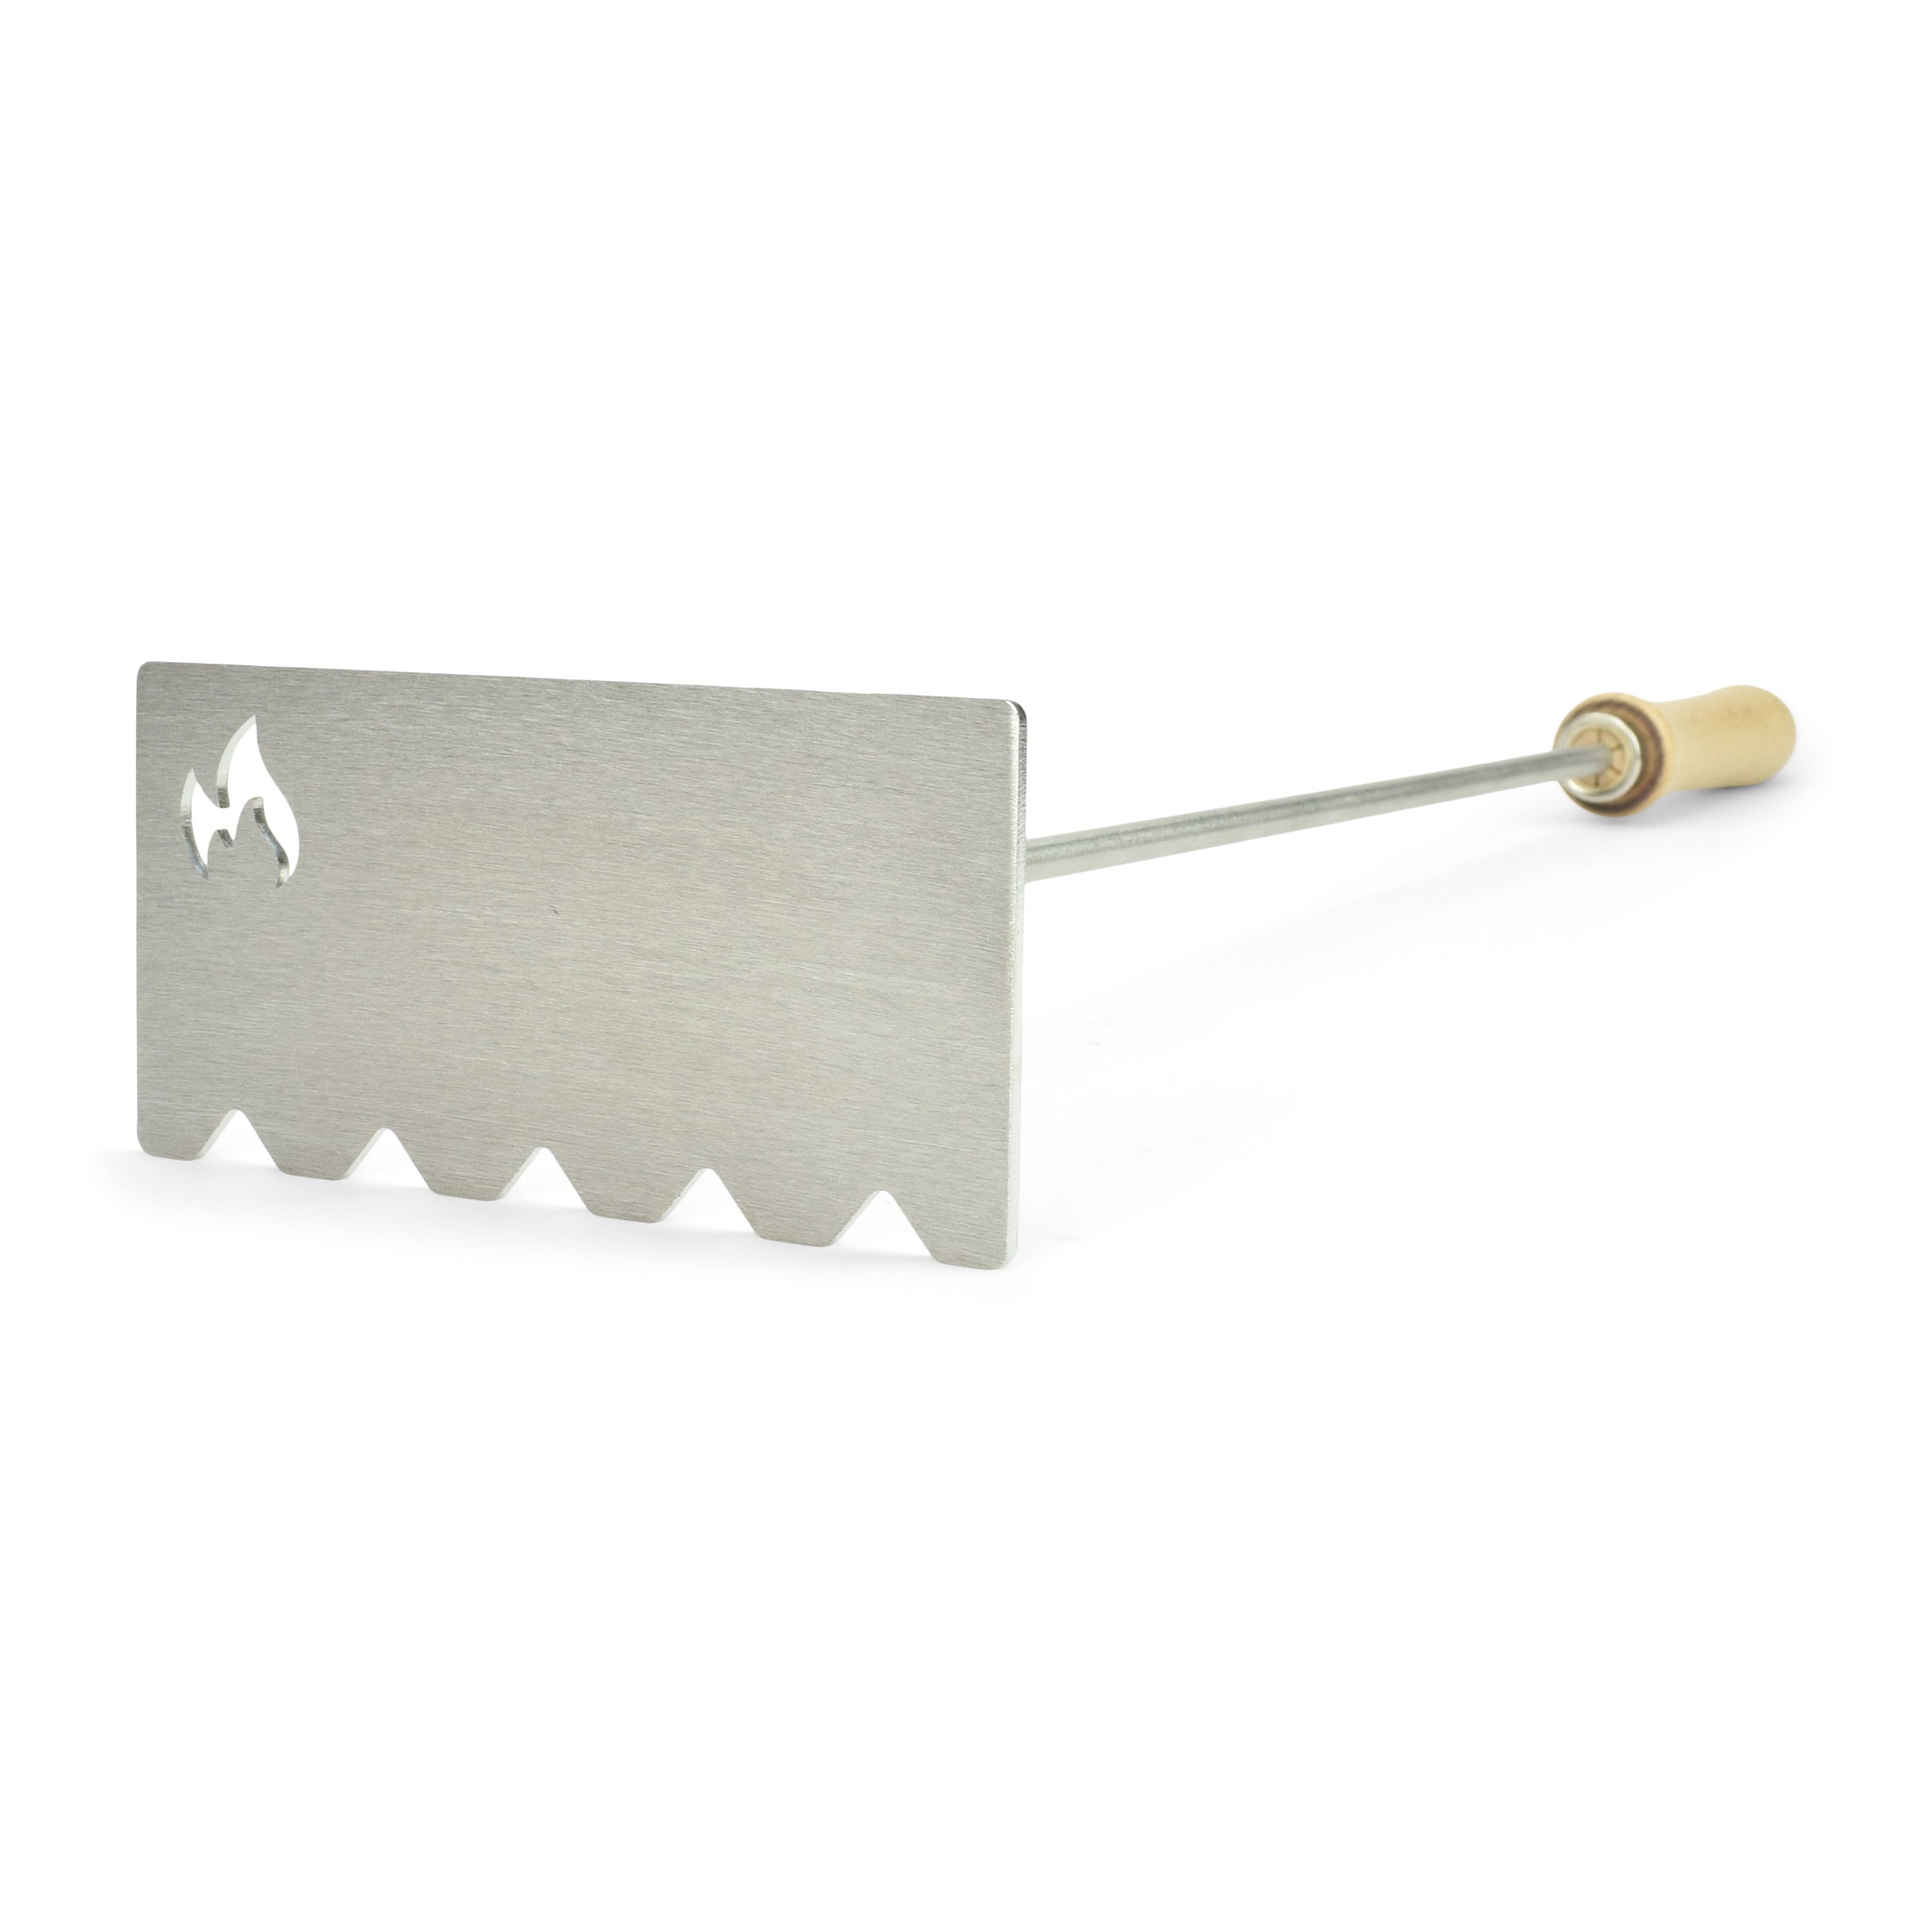 Stainless steel glow slide ash scraper For fireplace fire bowl and tiled stove